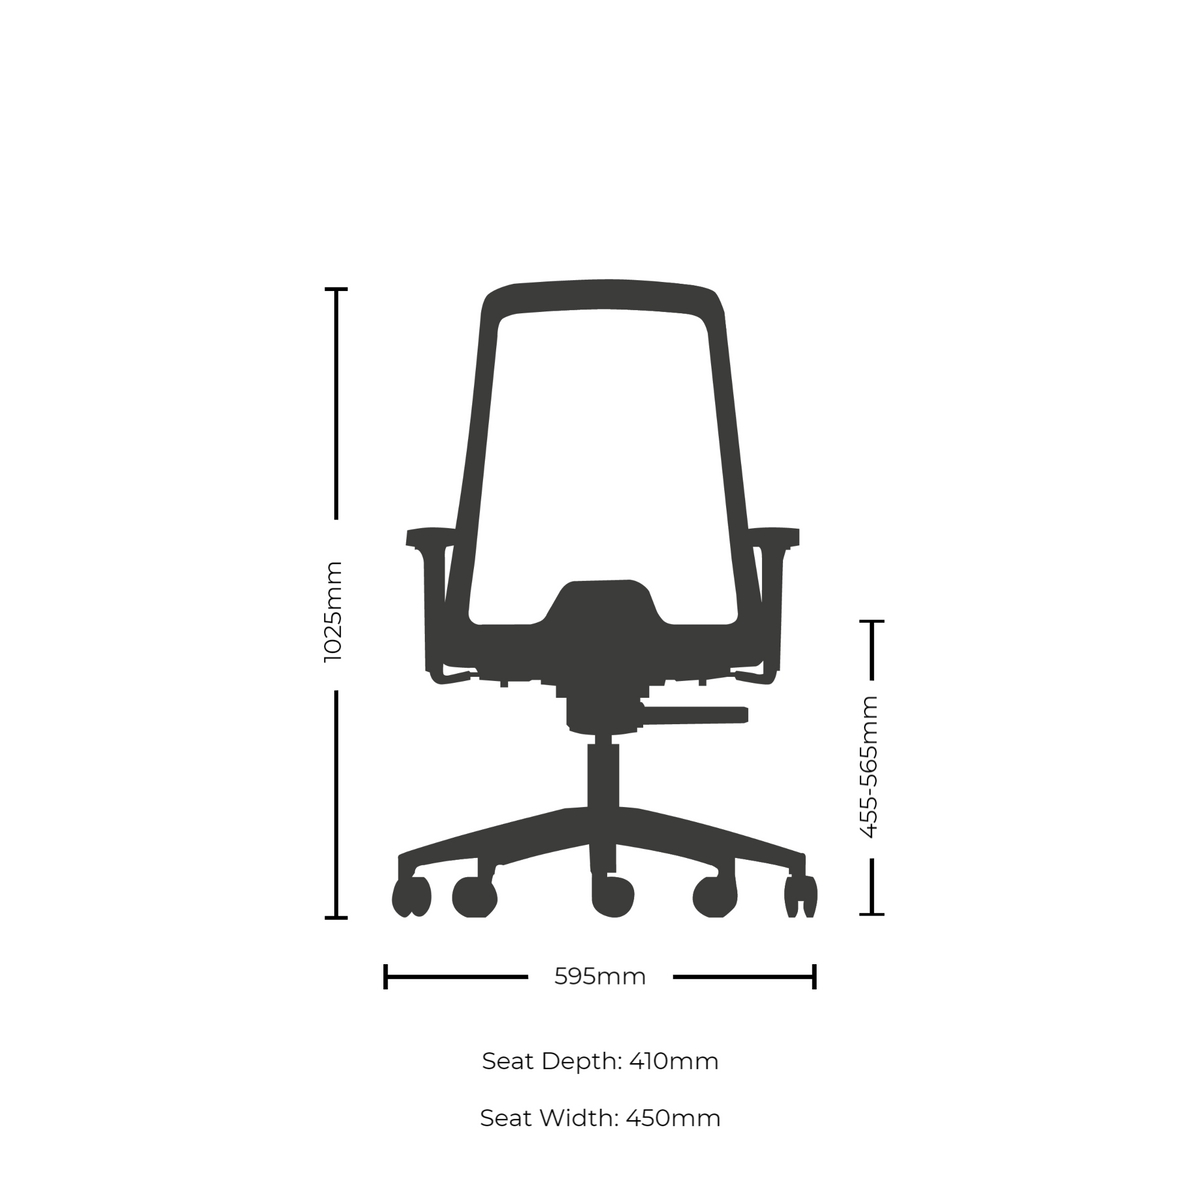 Dimensions for Interstuhl Buddy Conference Office Chair